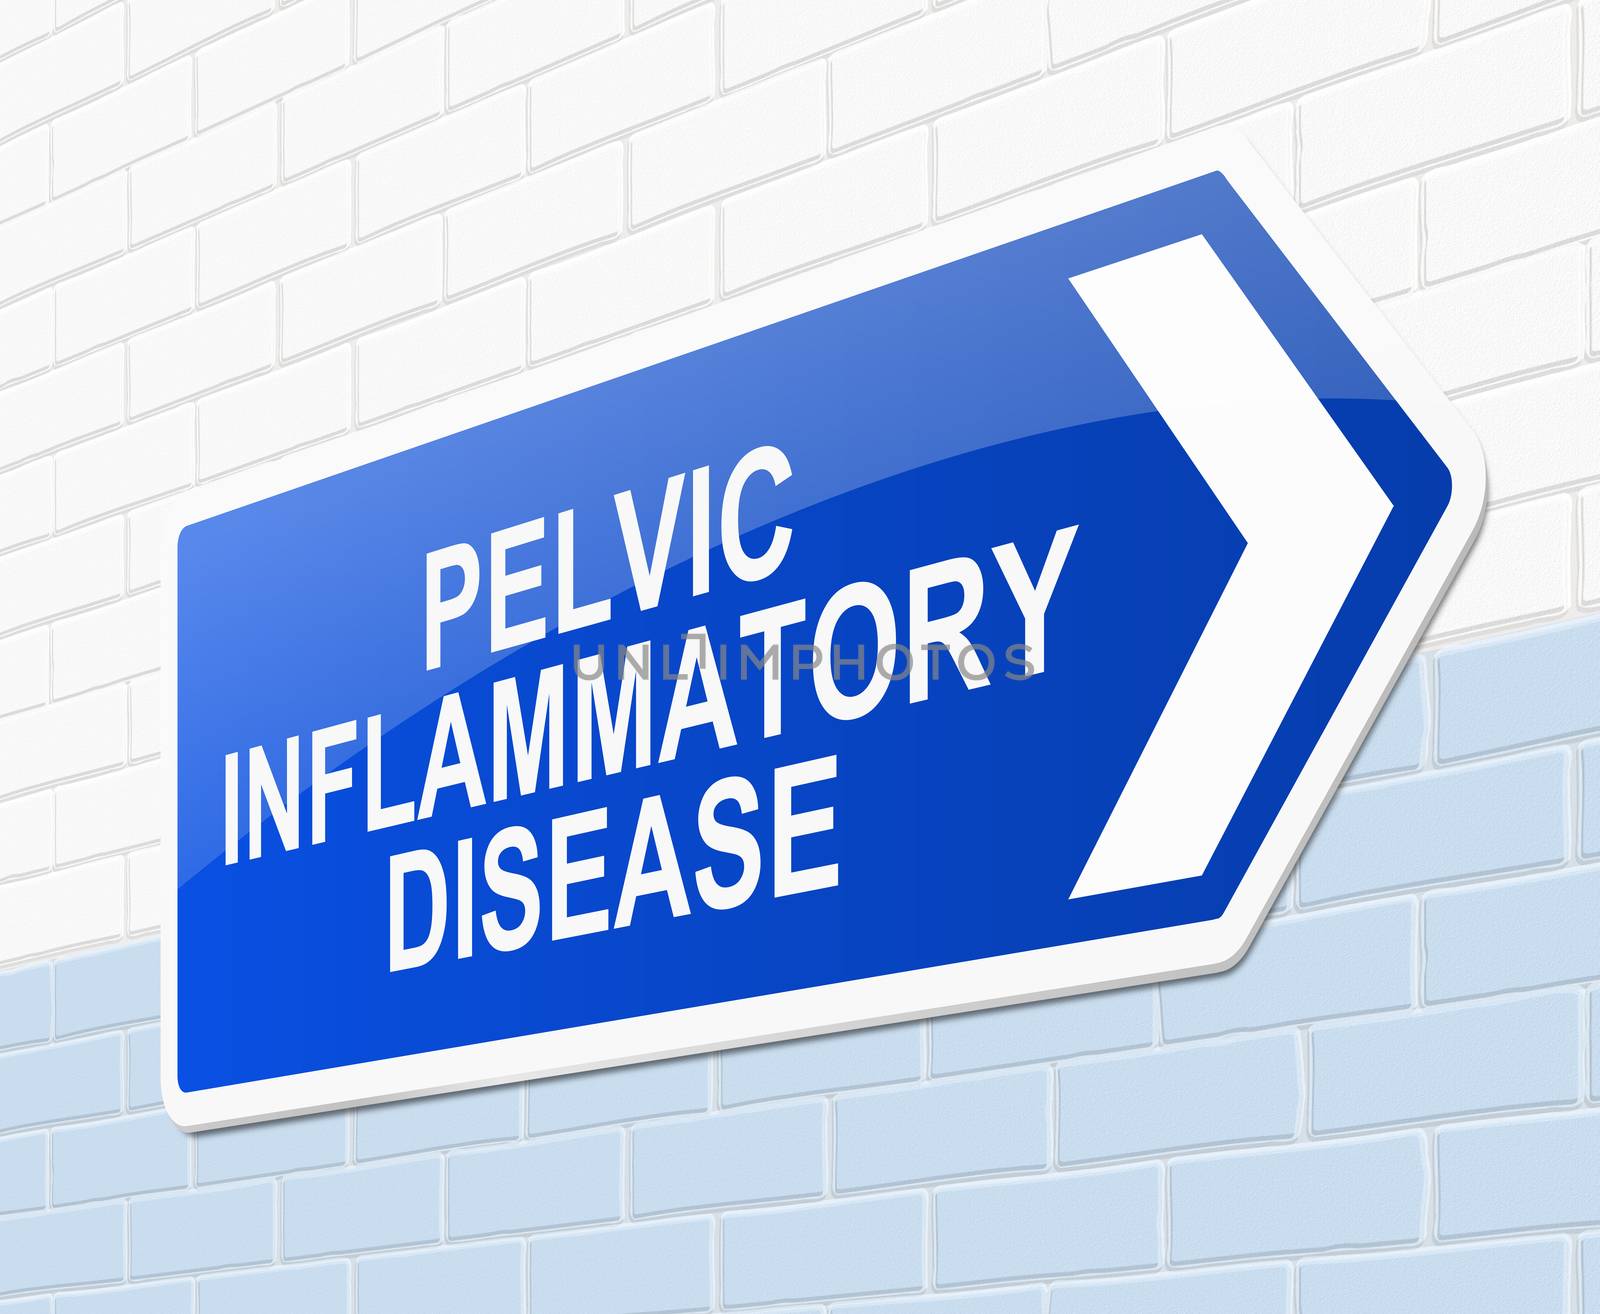 Illustration depicting a sign with a pelvic inflammatory disease concept.